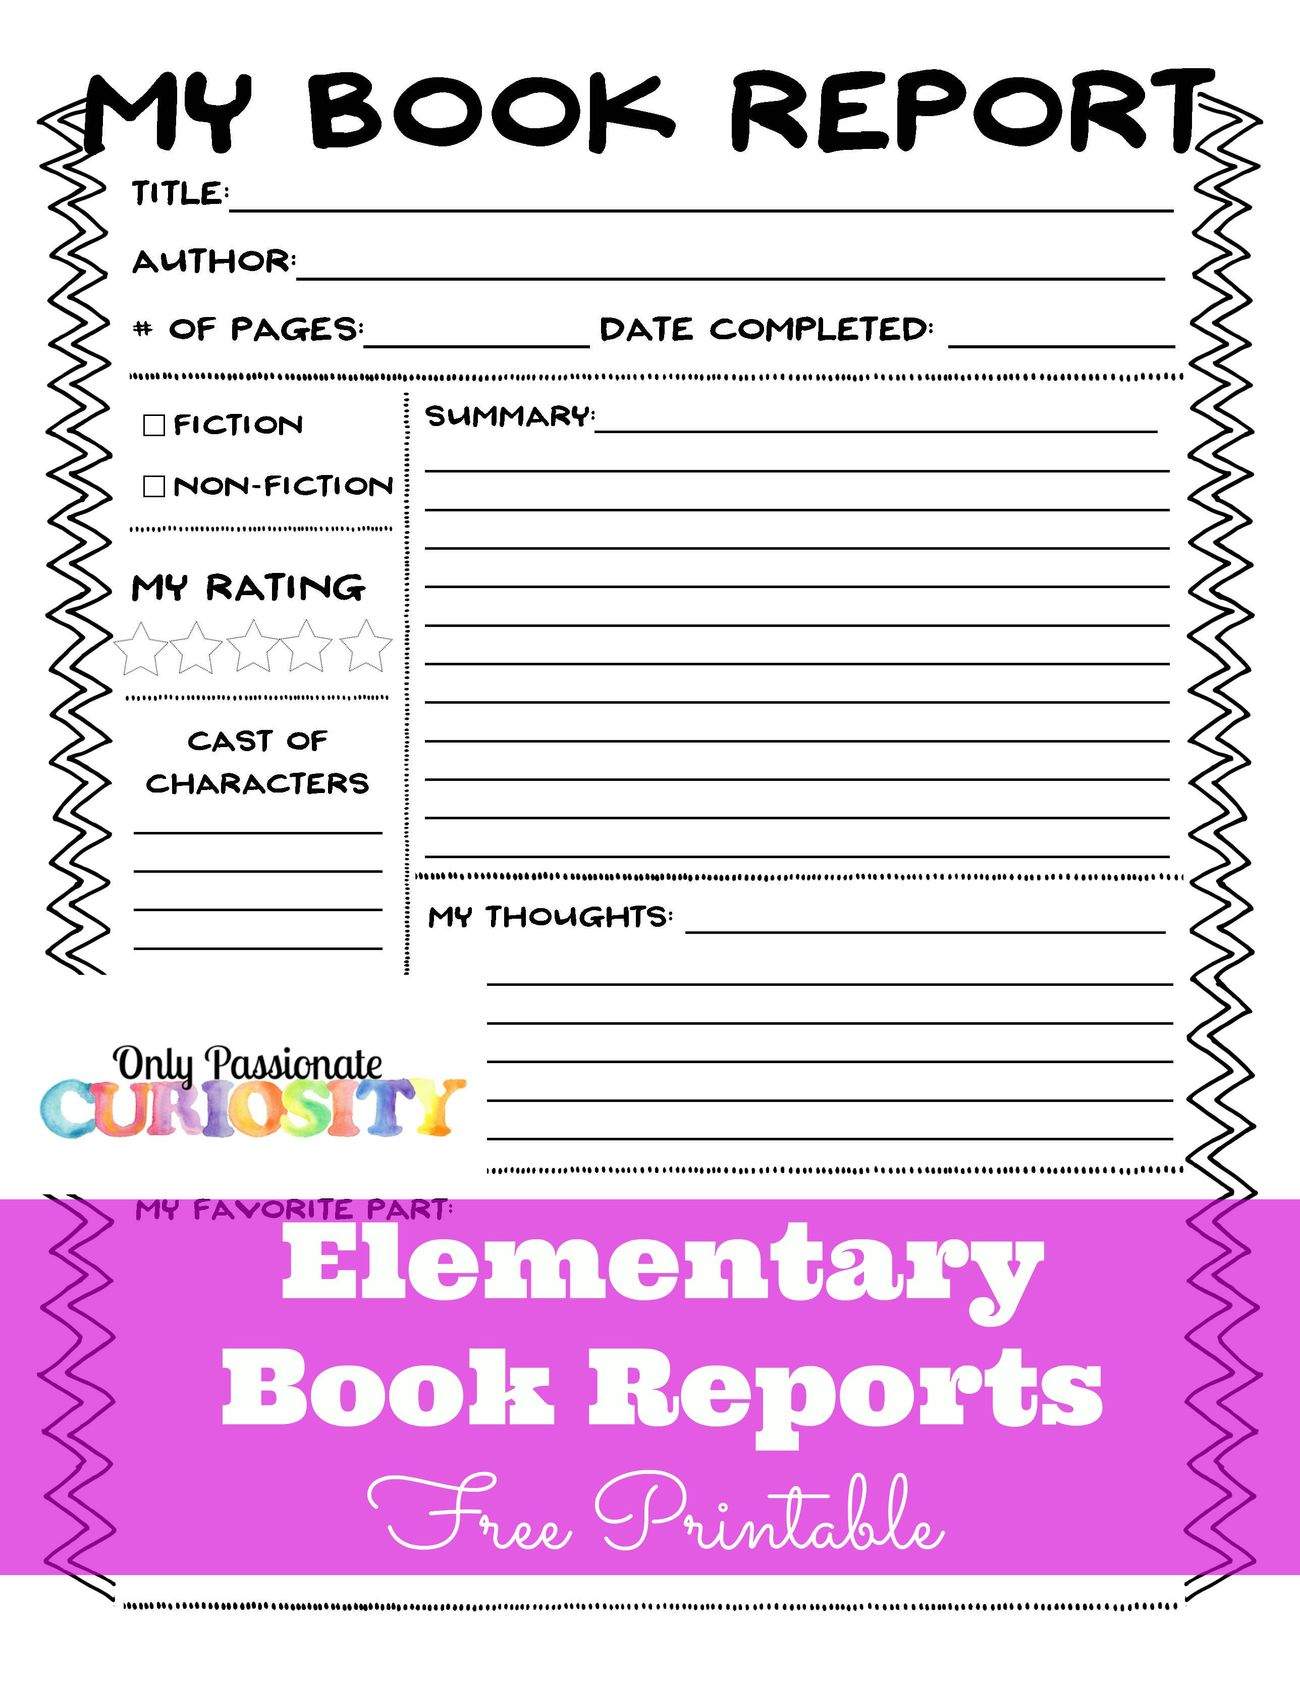 Elementary Book Reports Made Easy